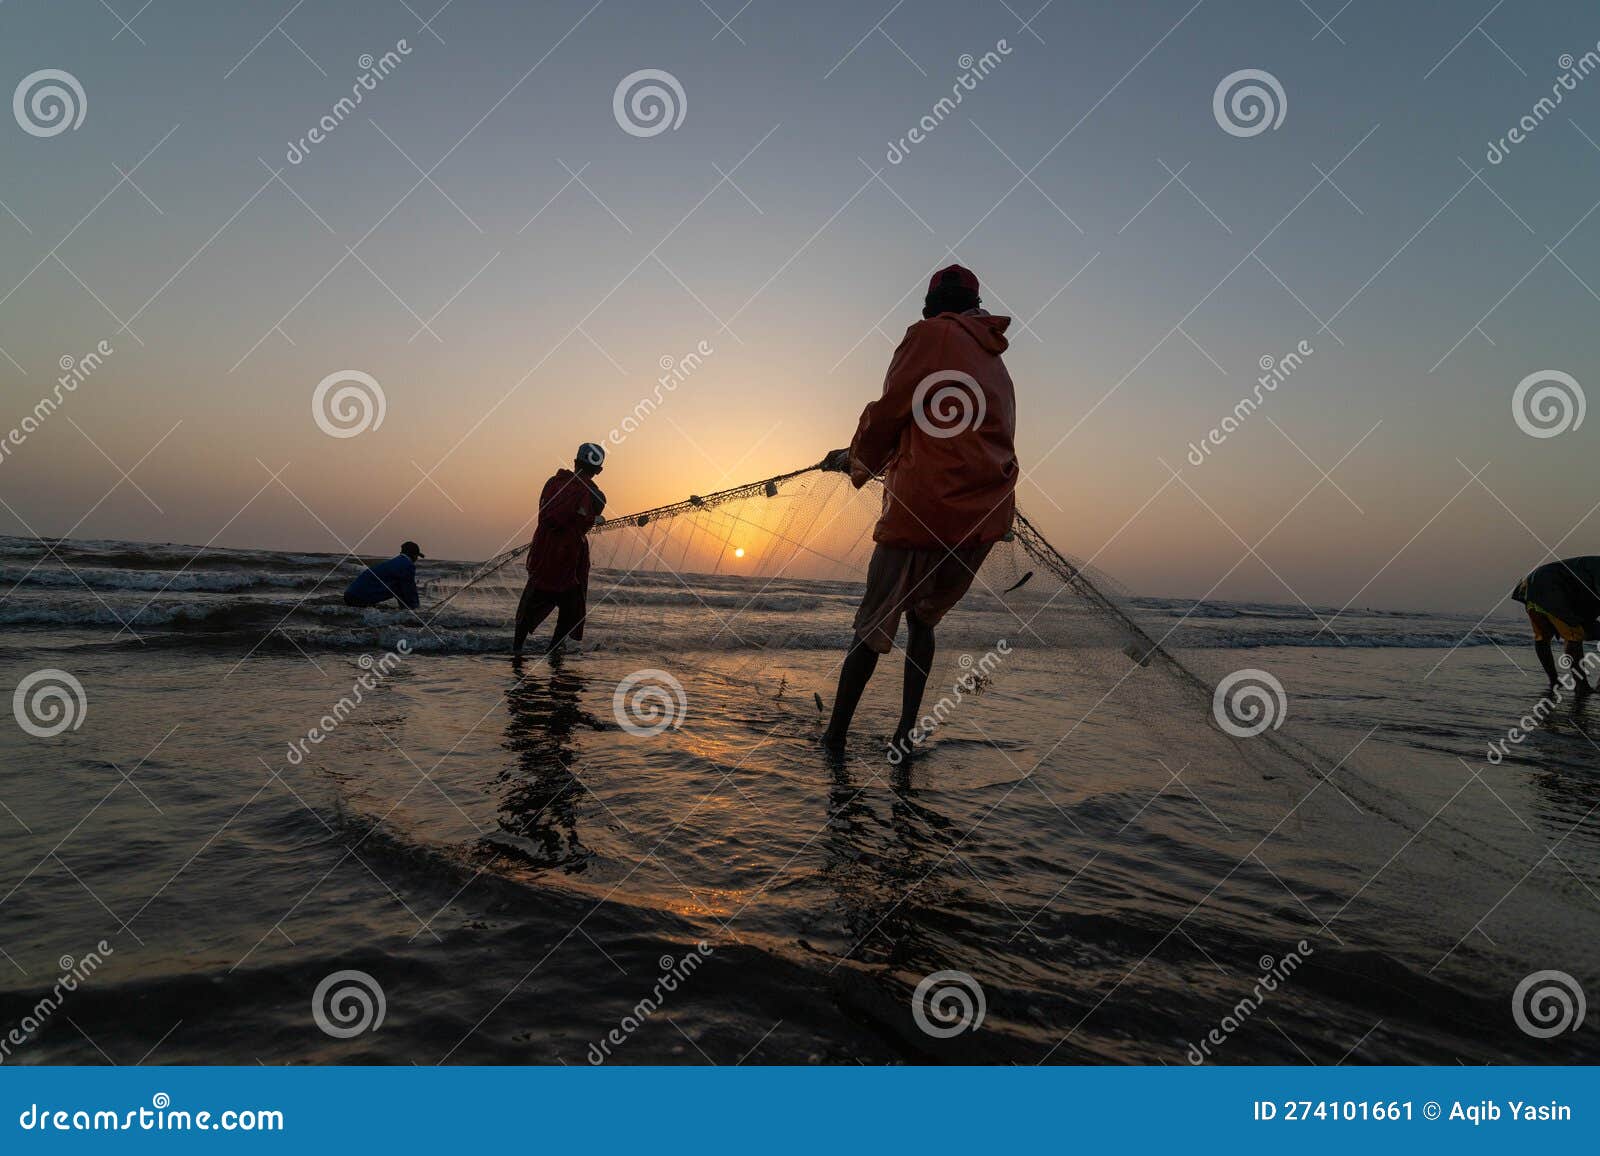 A Group of Fisherman Pulling Fishing Net for Fishing Editorial